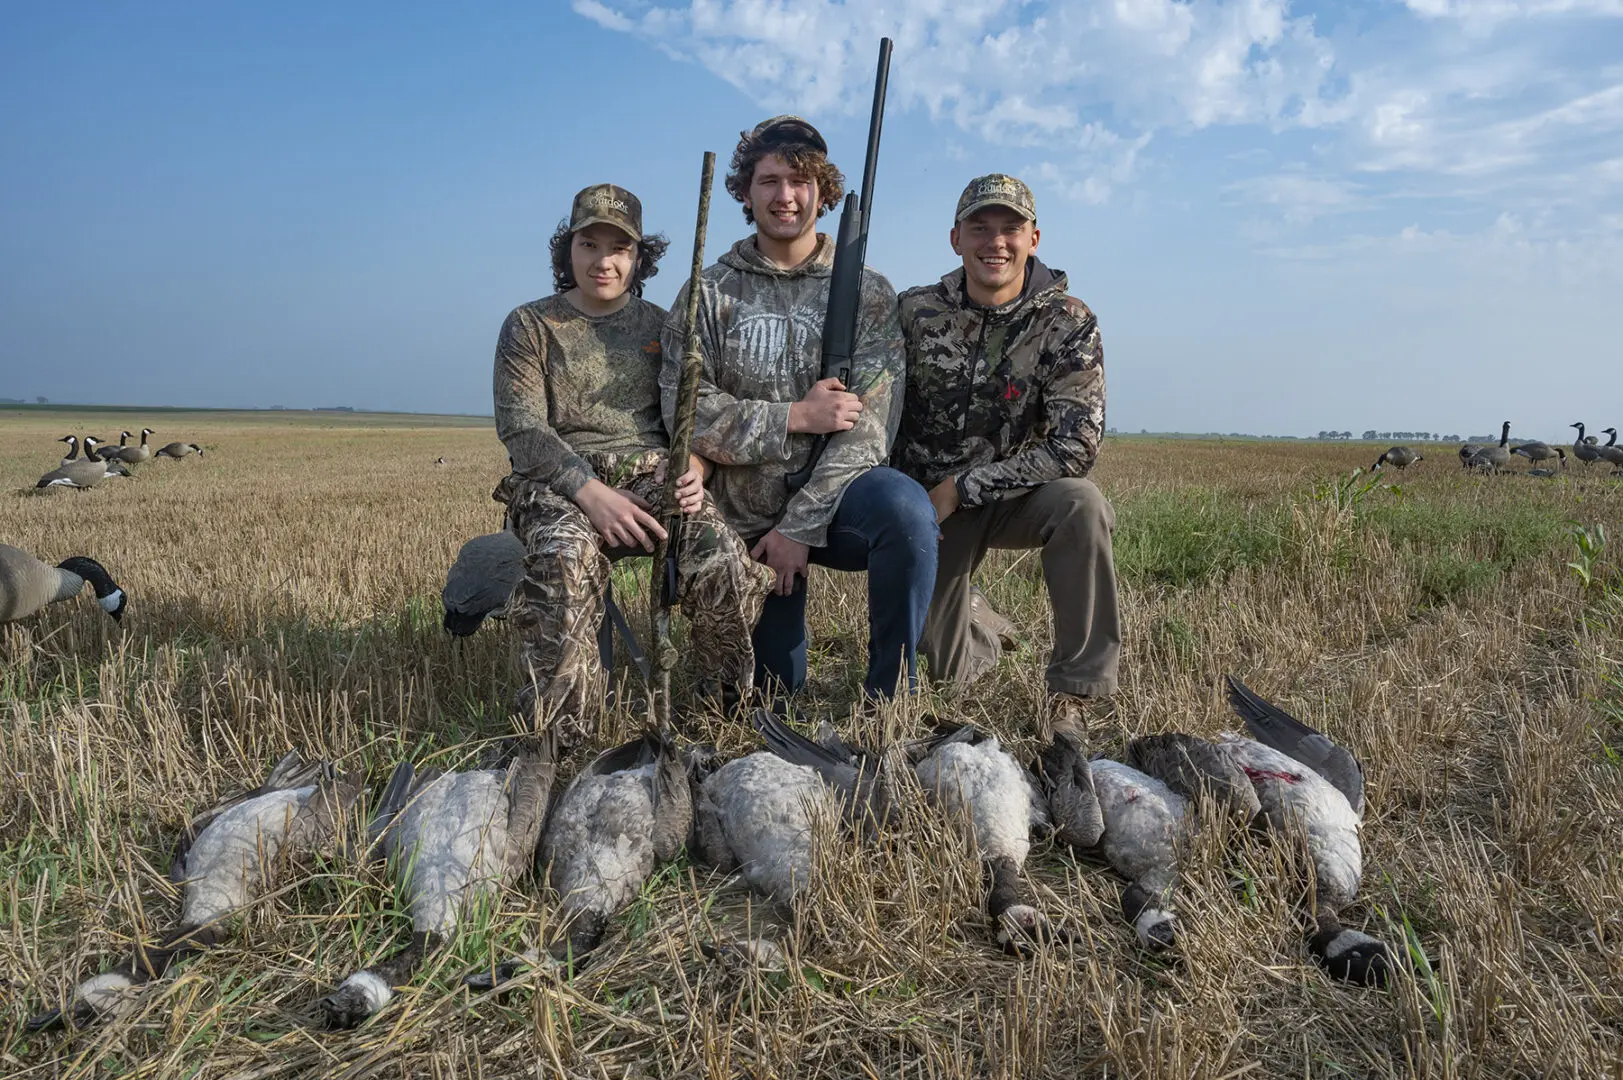 Three hunters pose with their guns while a group of ducks lay in the grass.